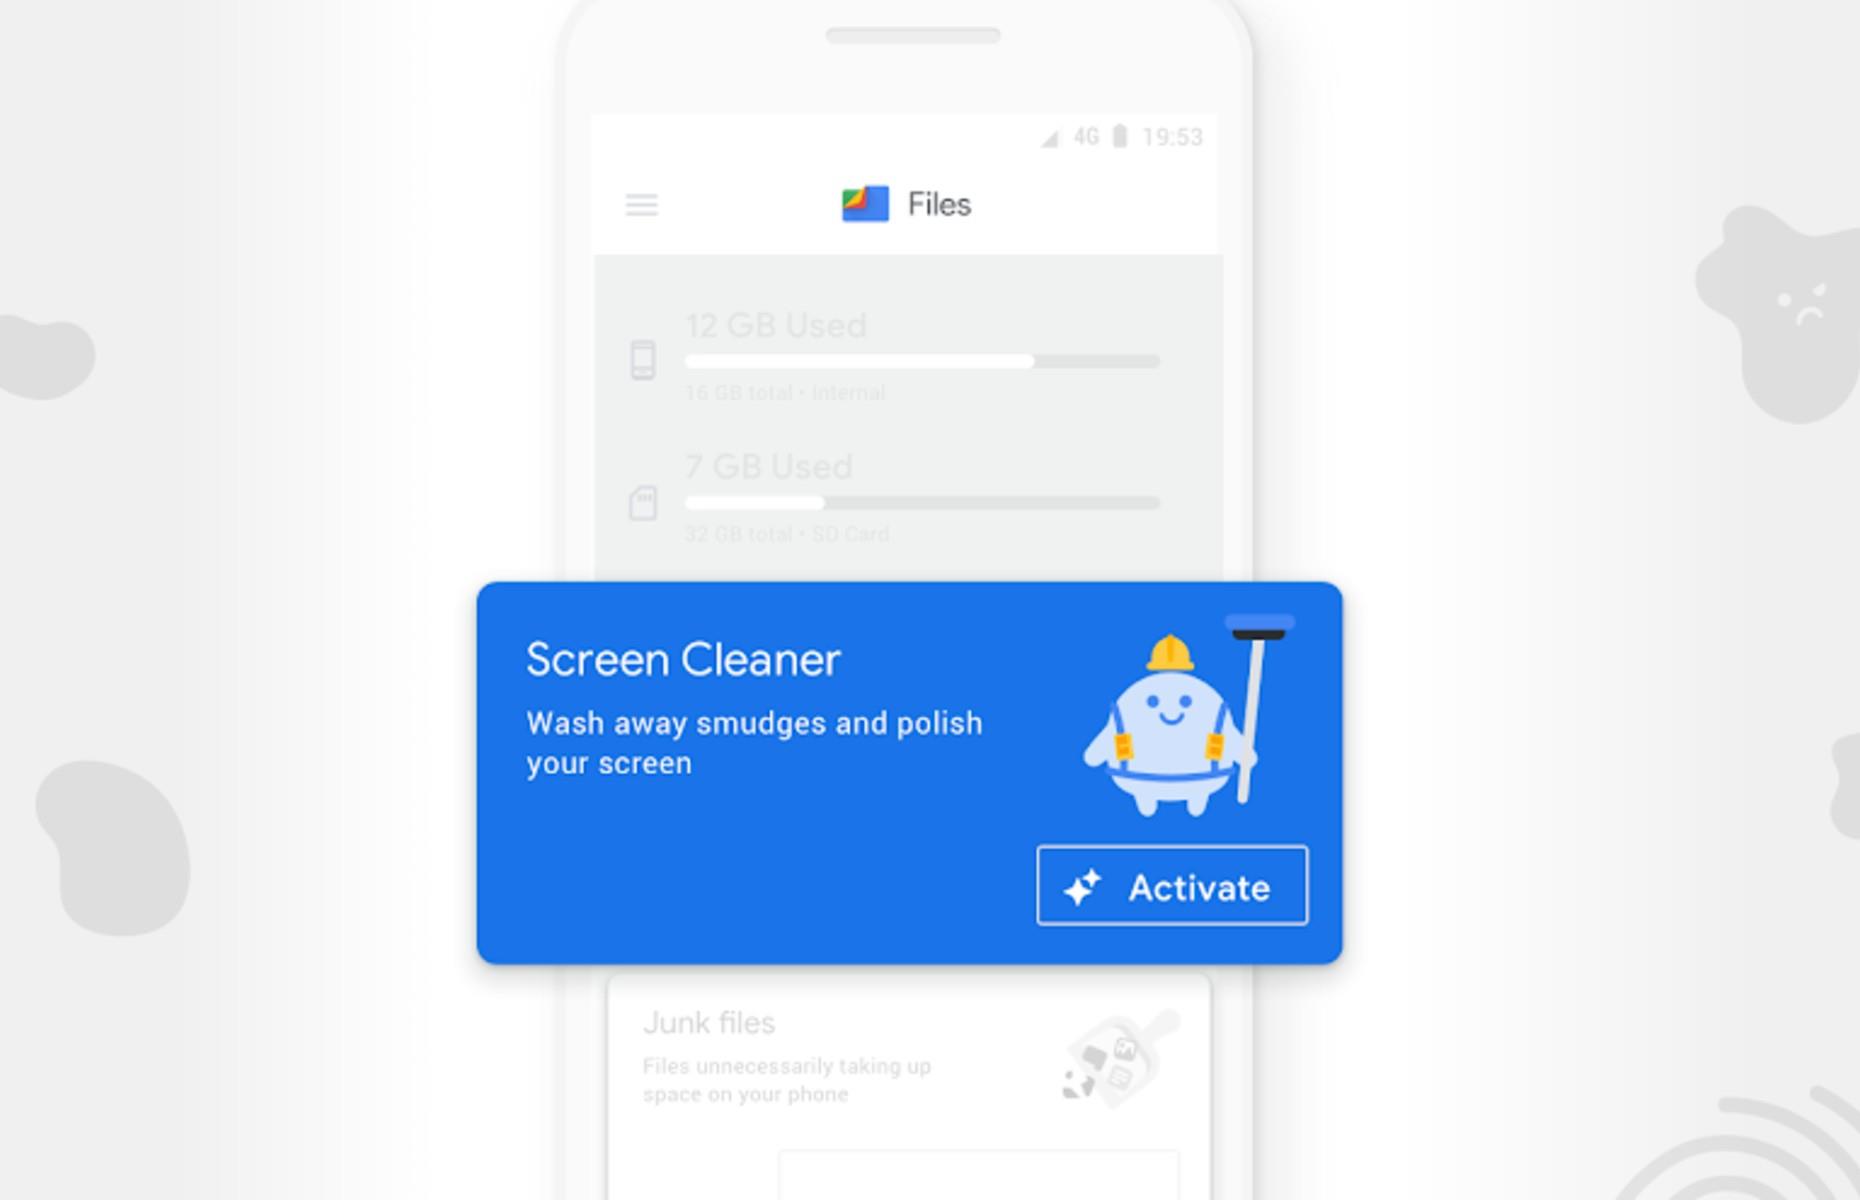 Google cleans up with its “Screen Cleaner” feature